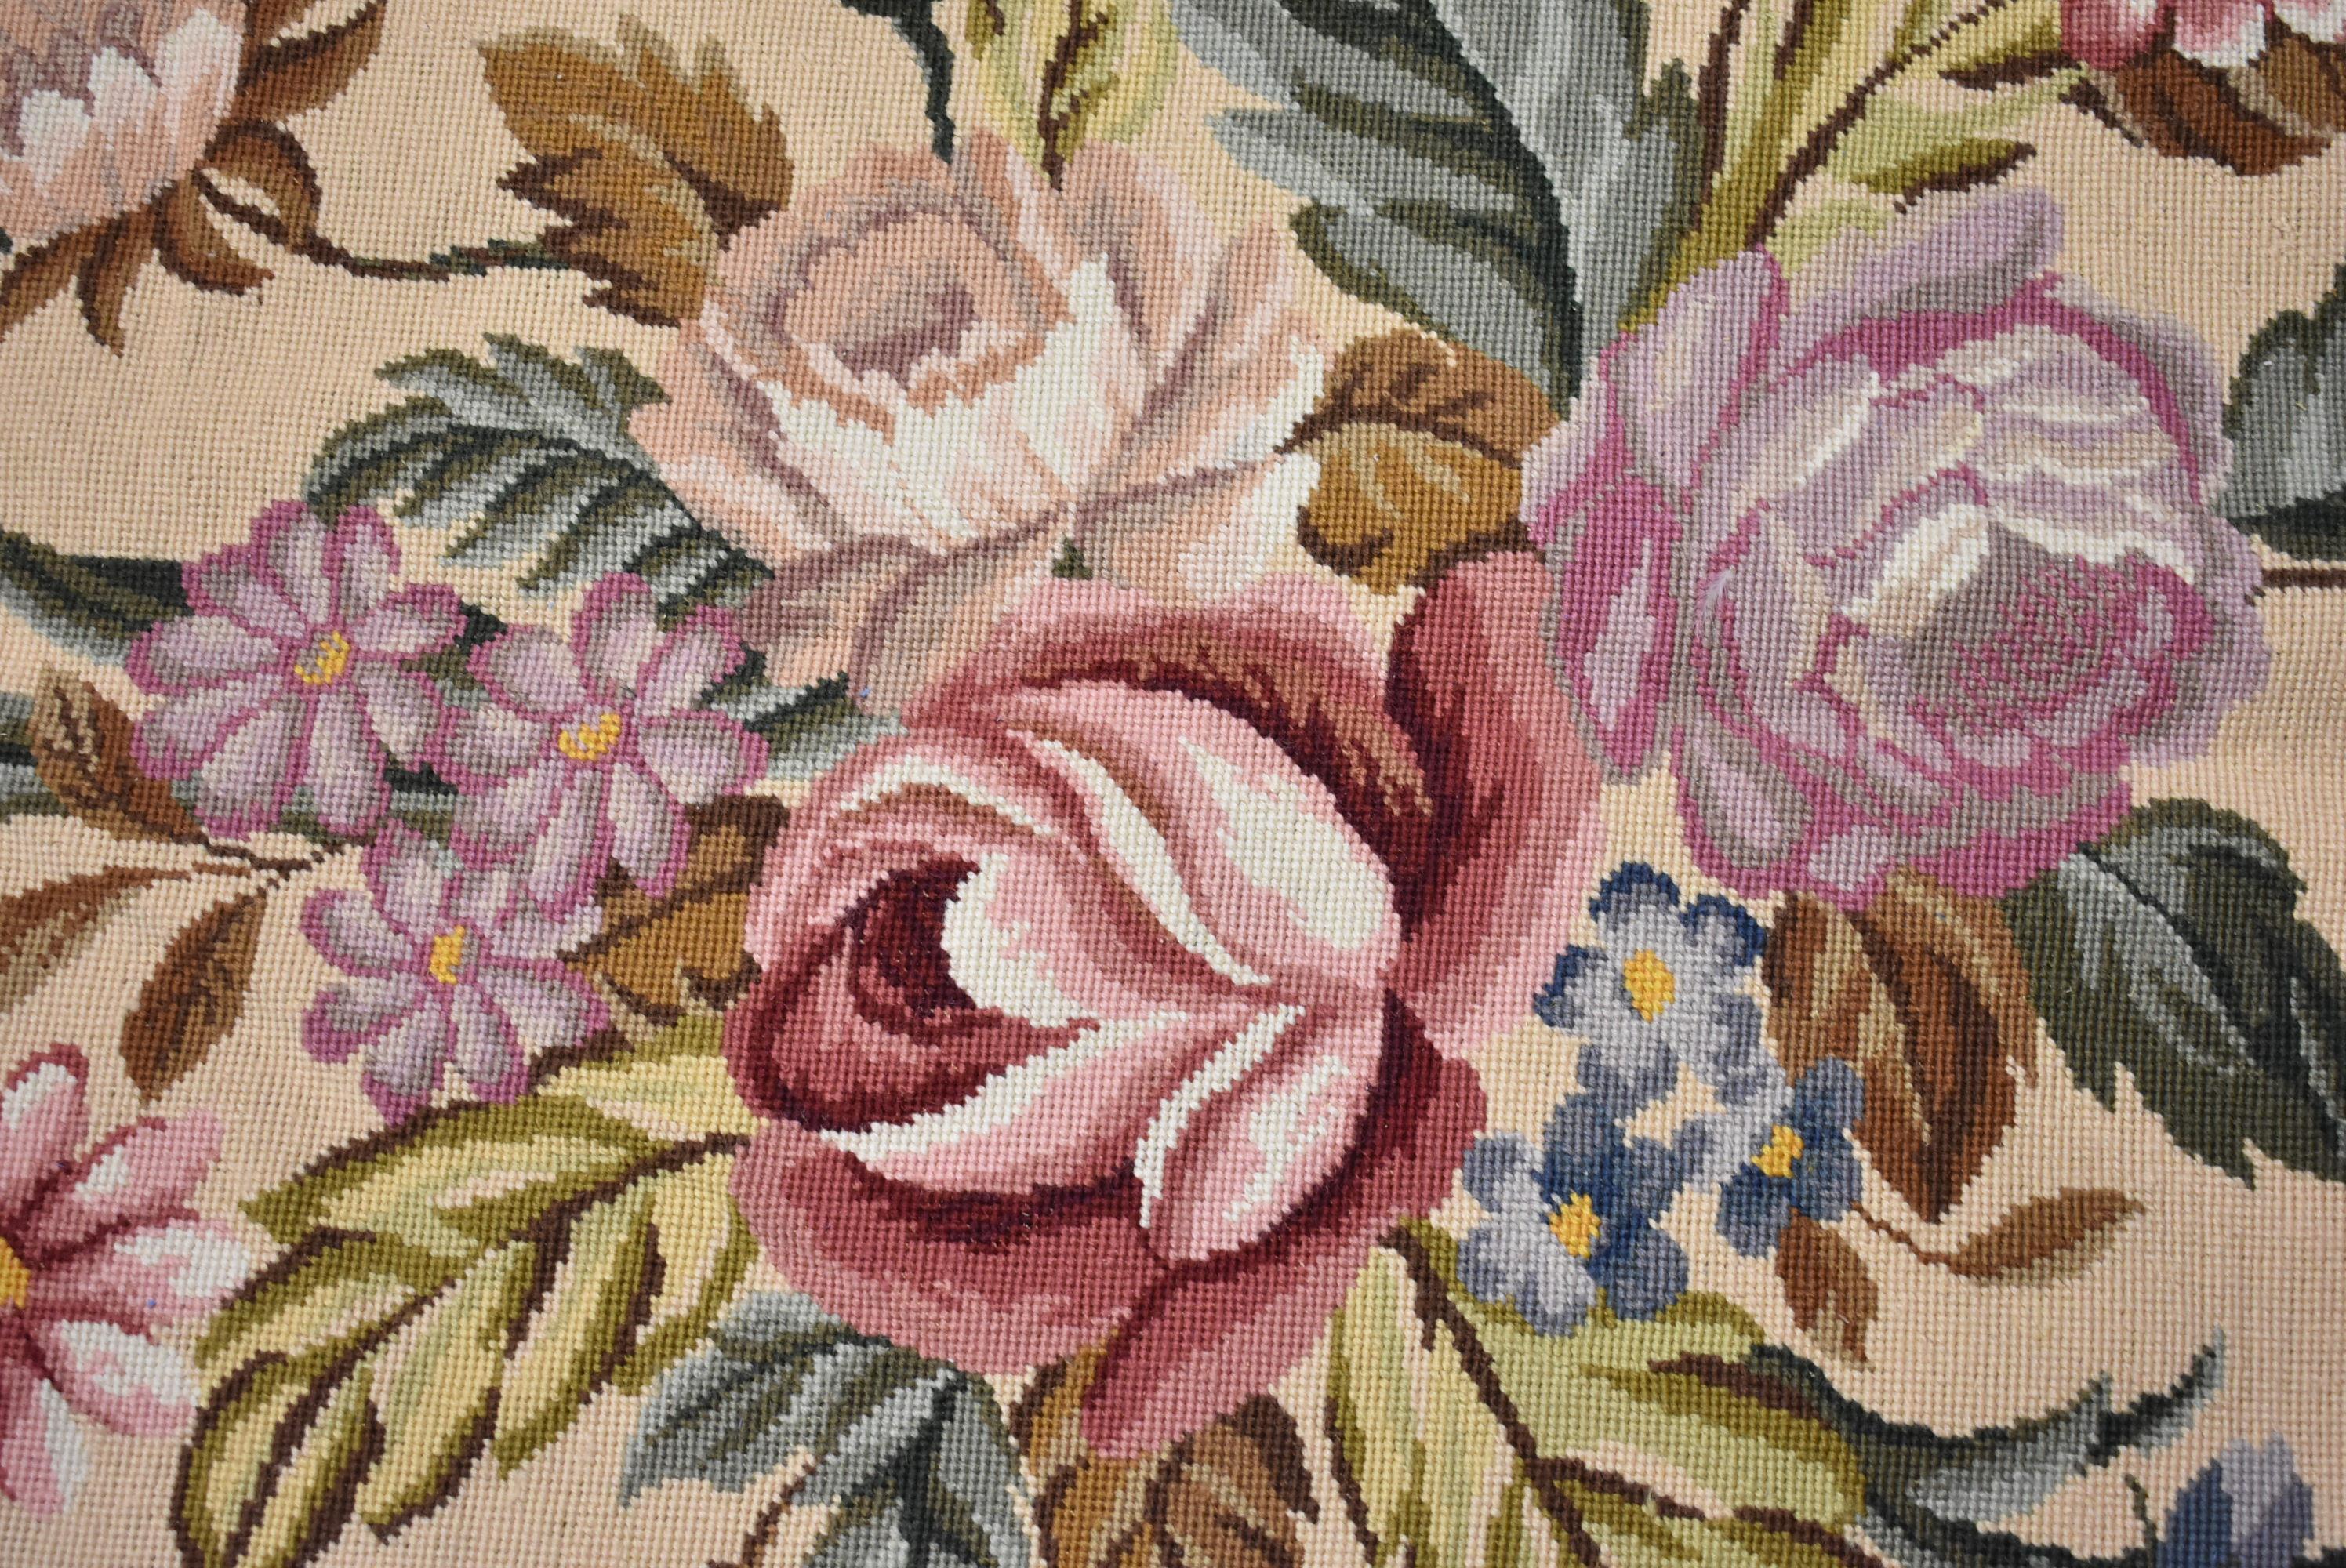 Wool Floral Tapestry Rug Roses Lattice Aubusson, Beauvais Style, 8'6